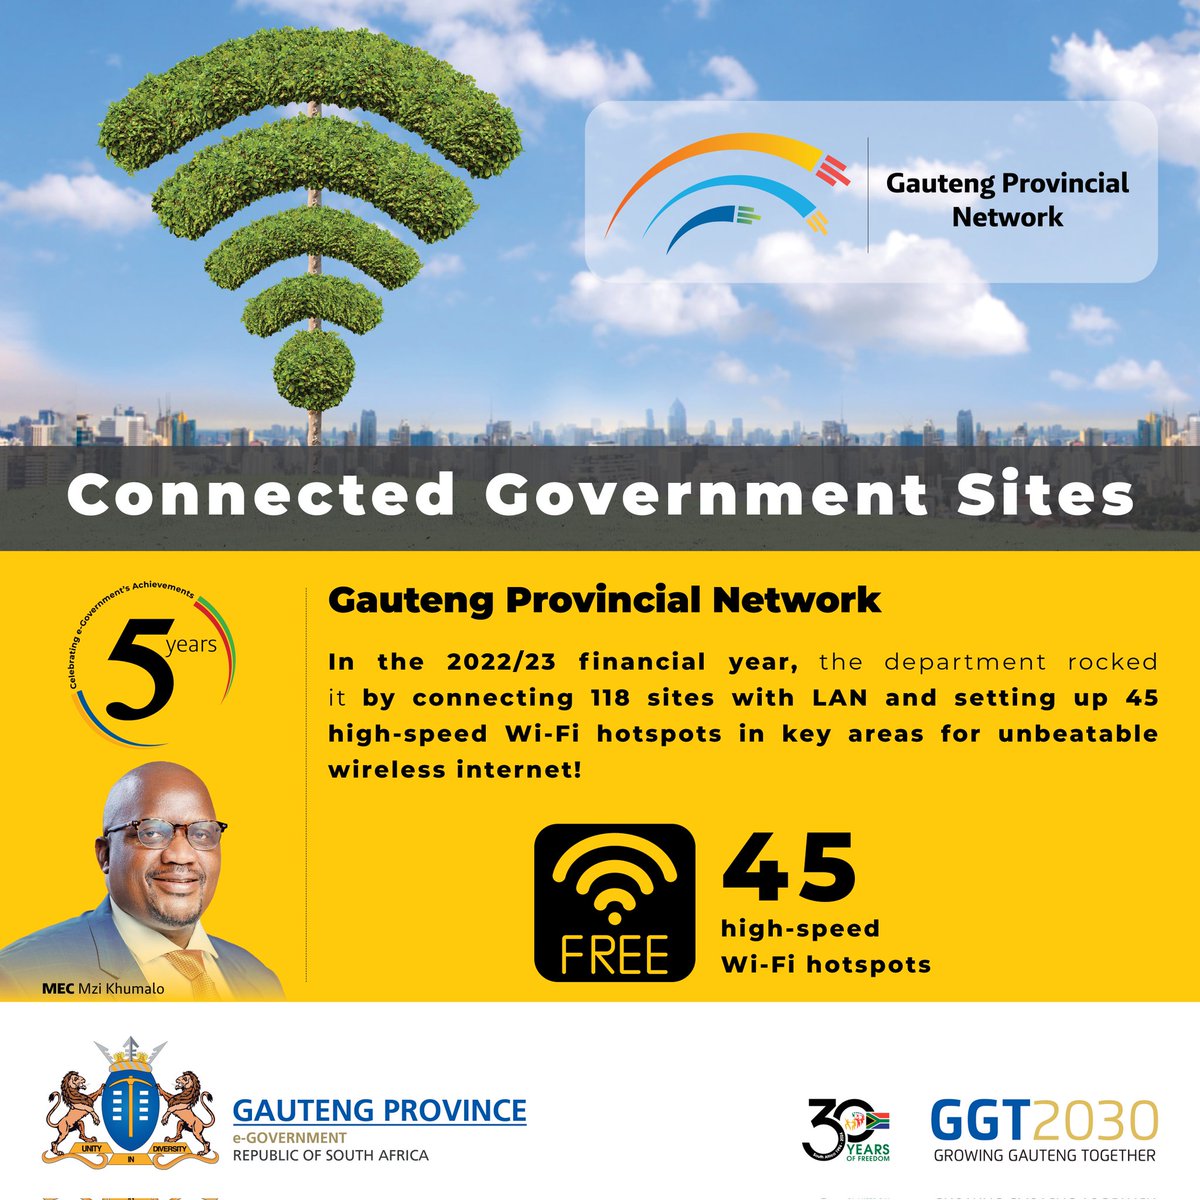 e-Government continues with the expansion of the Gauteng Provincial Network, bringing high-speed connectivity to every corner of our province. #GautengConnects #DigitalTransformation #InnovationNation